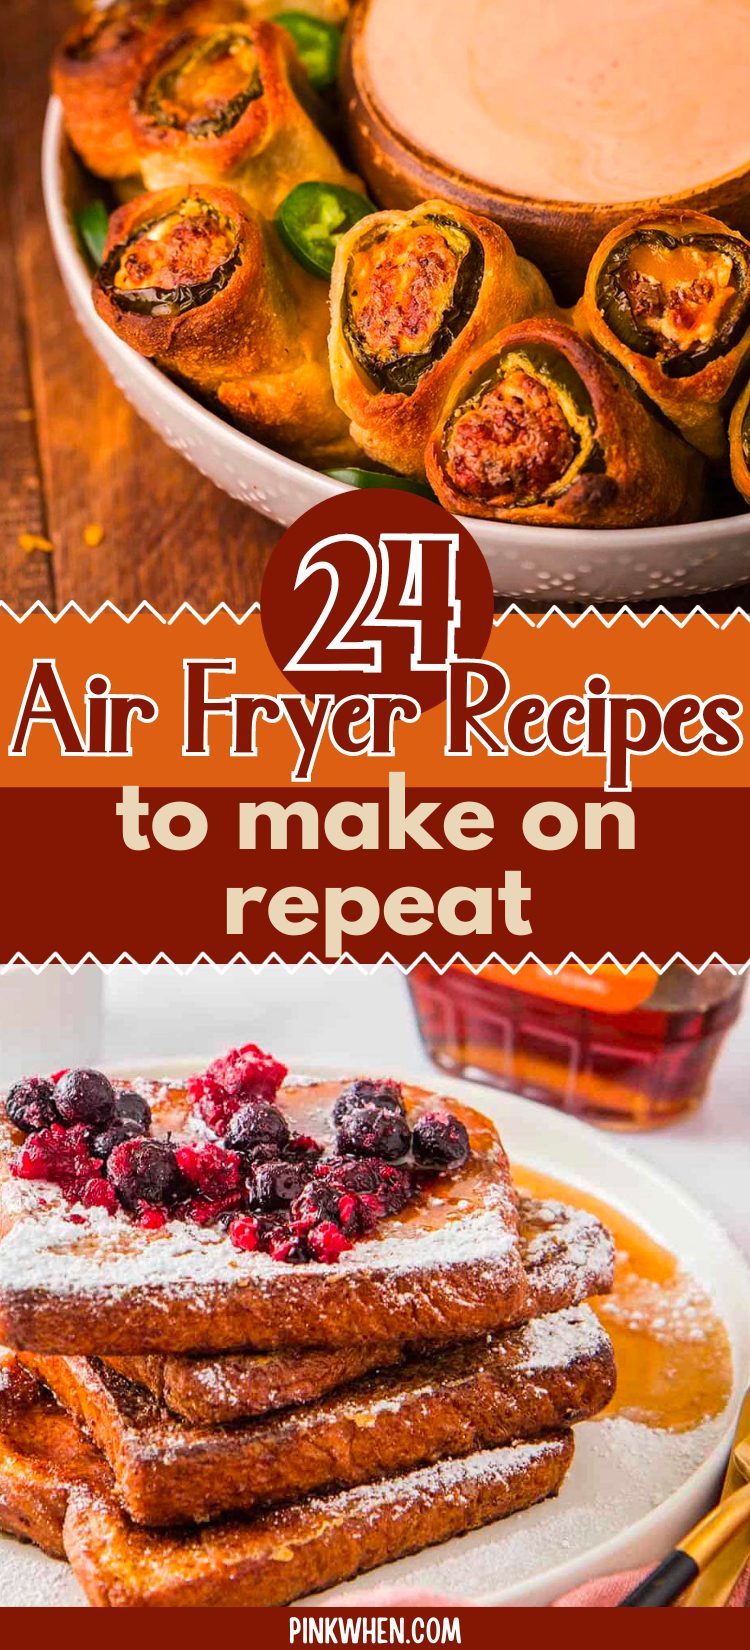 Explore 24 fantastic air fryer recipes that are perfect for making on repeat.